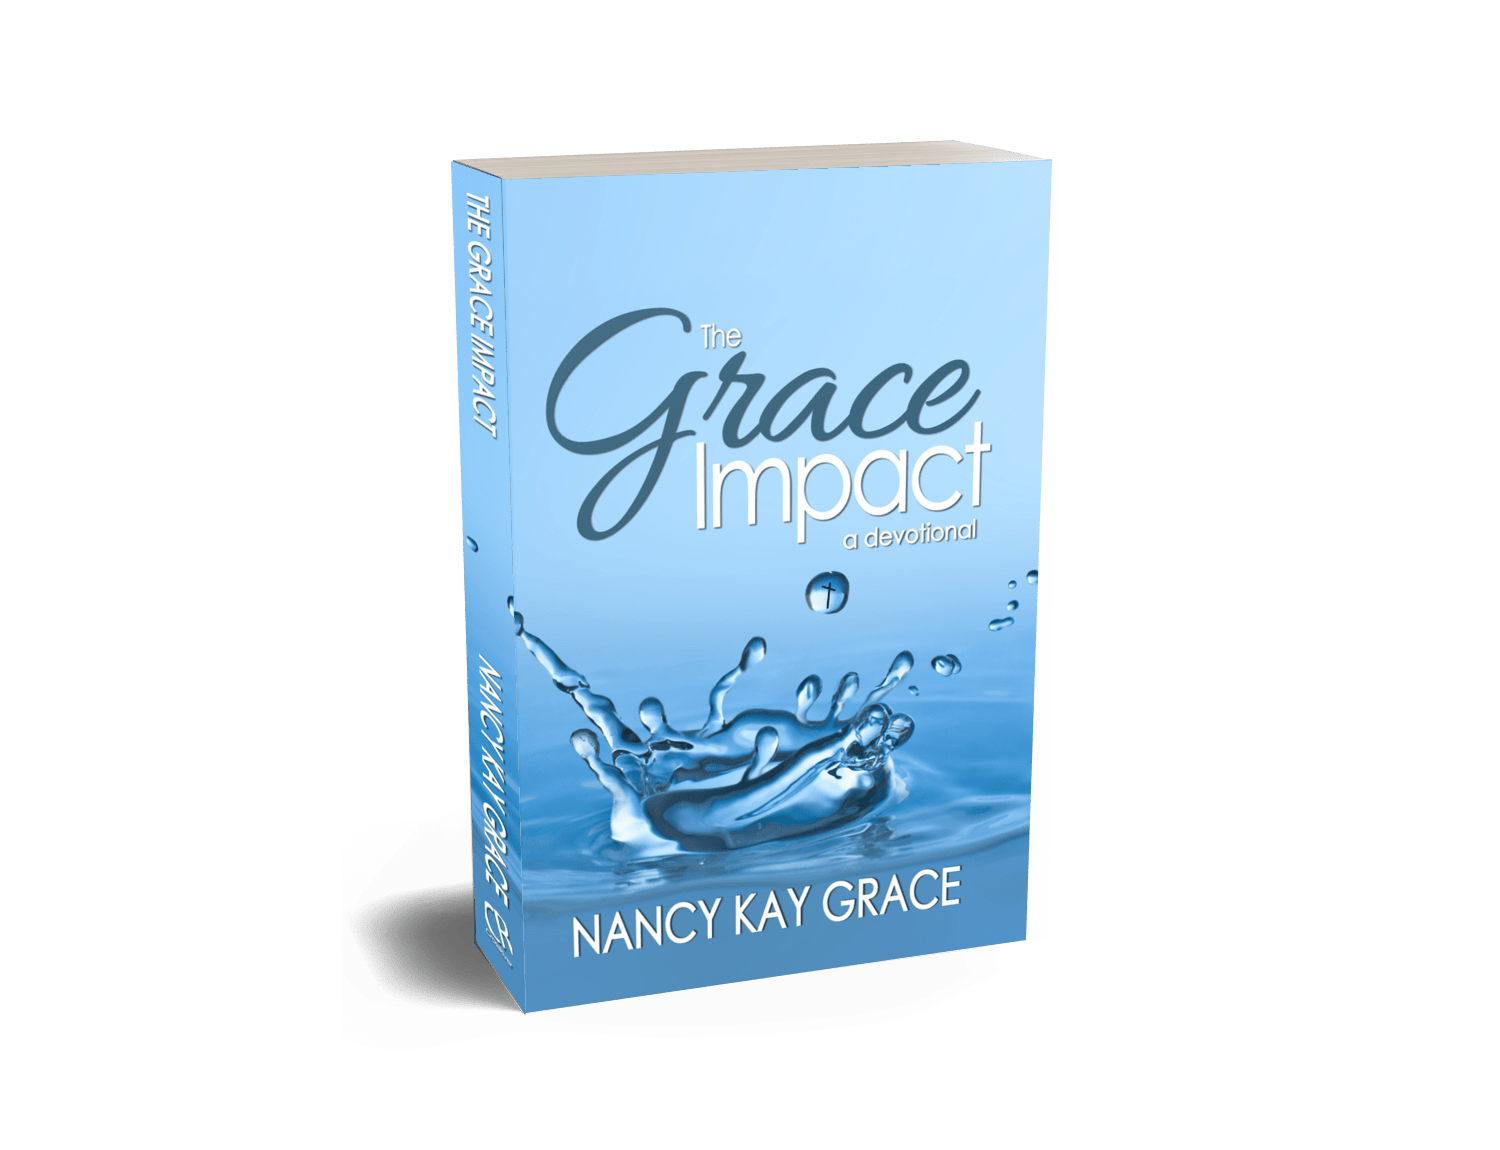 definition of grace - The Grace Impact by Nancy Kay Grace from Christian book publisher CrossRiver Media Group